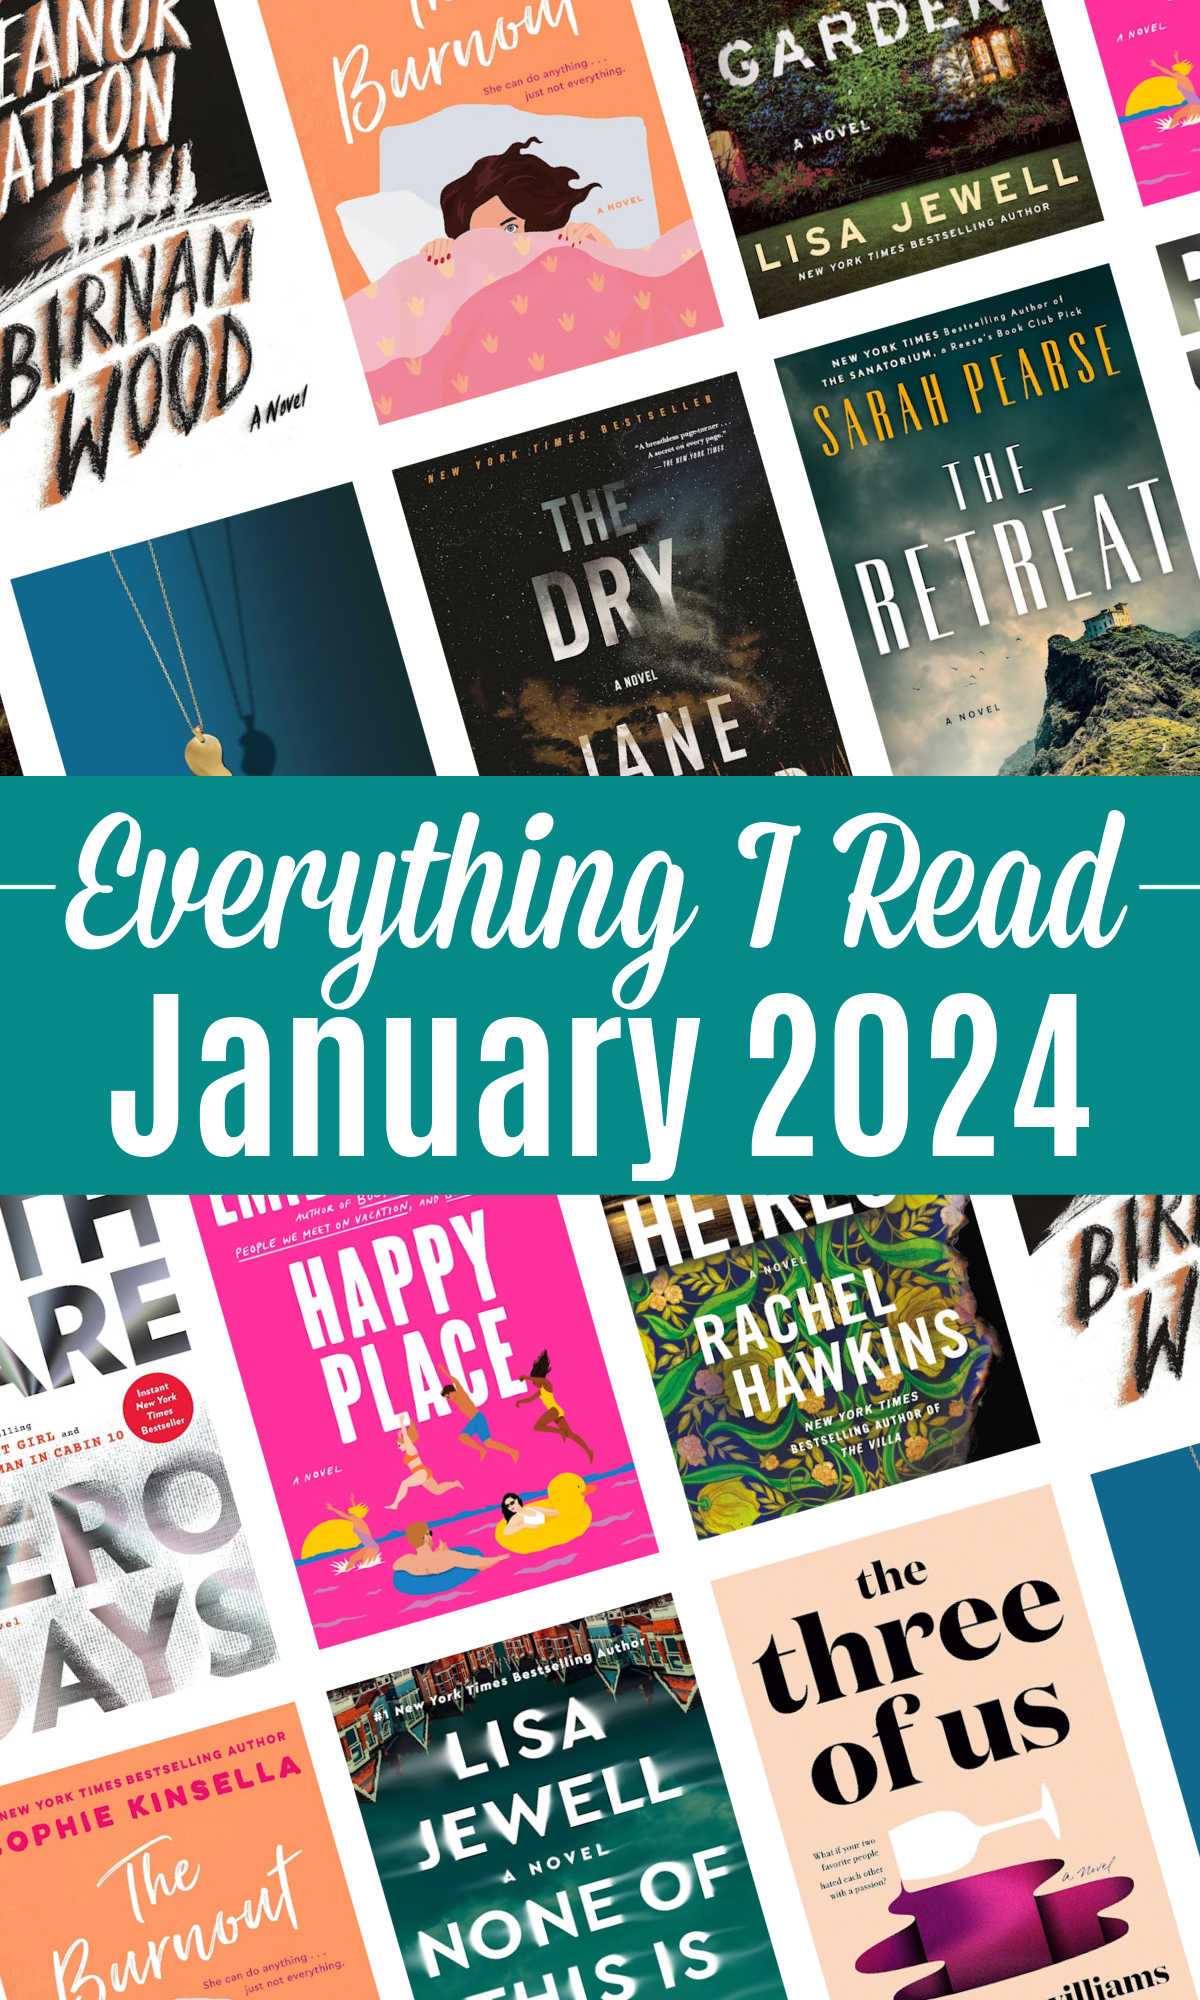 A collage of book covers of everything I read in January 2024.